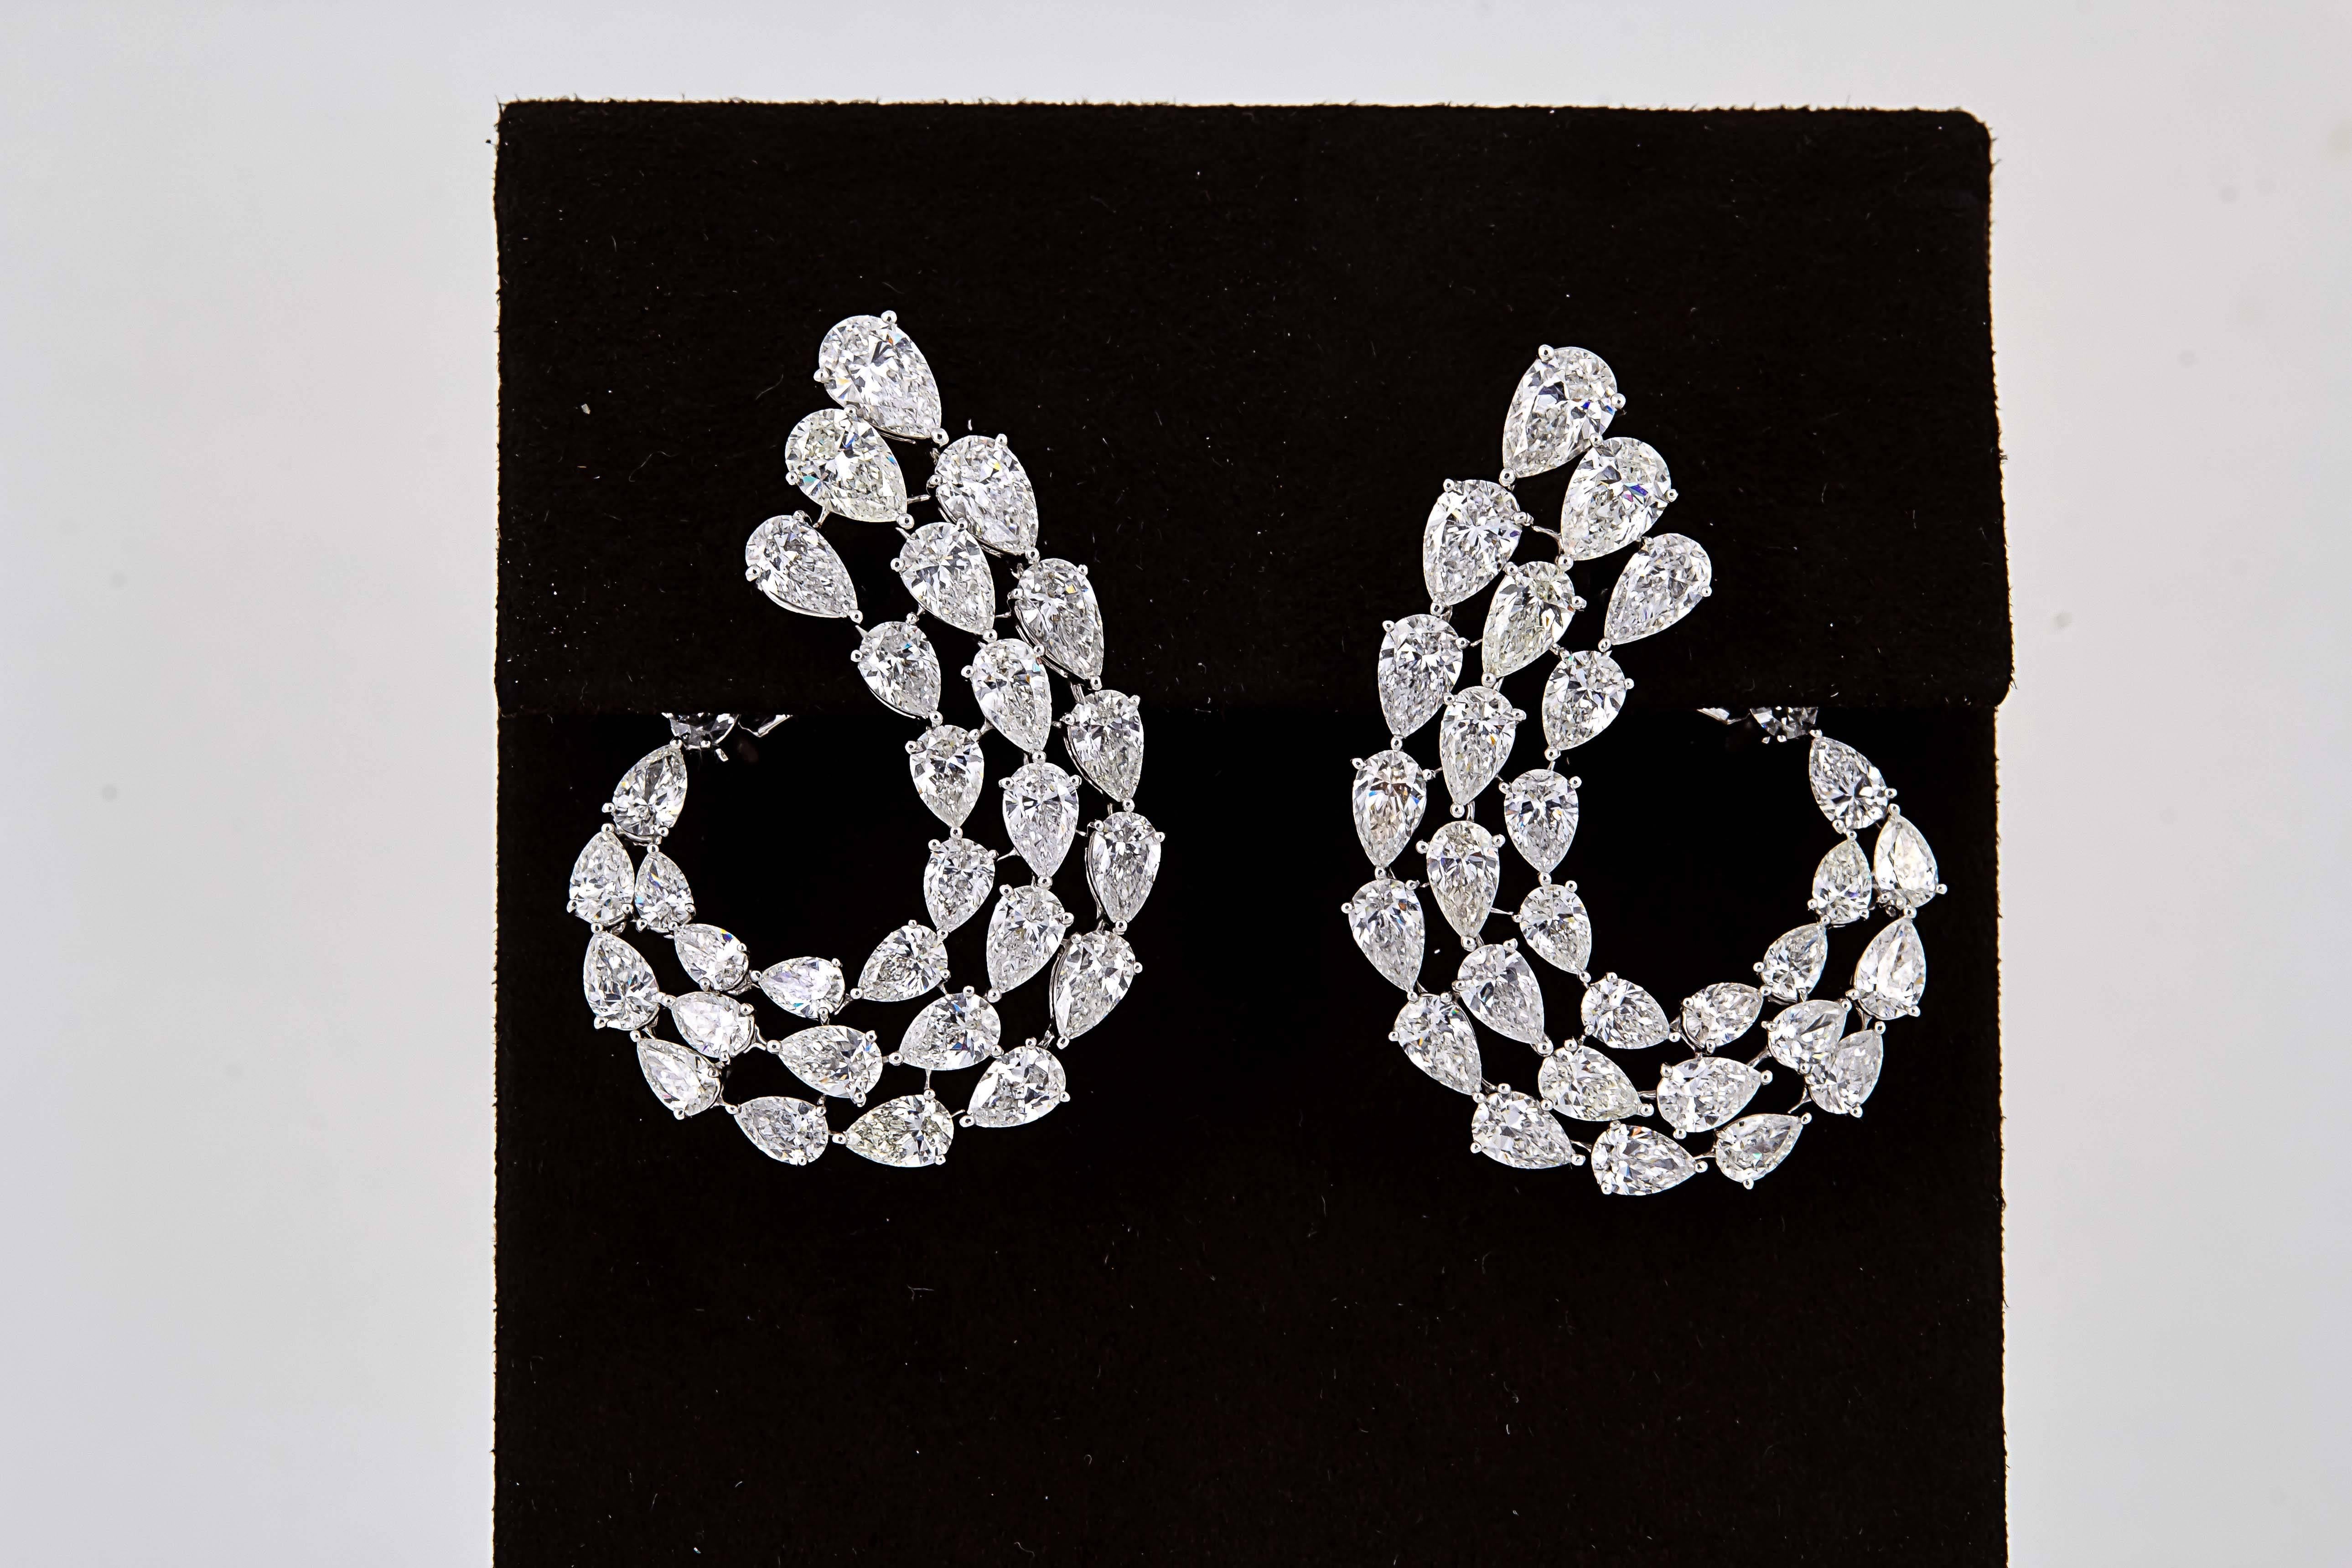 

An AMAZING pair of earrings! 

Designed and handcrafted by our skilled jewelers in New York, this earring is a WOW. 

15.49 carats of F/G color VS clarity pear shaped diamonds set in 18k white gold.

The earrings measure approximately 1.57